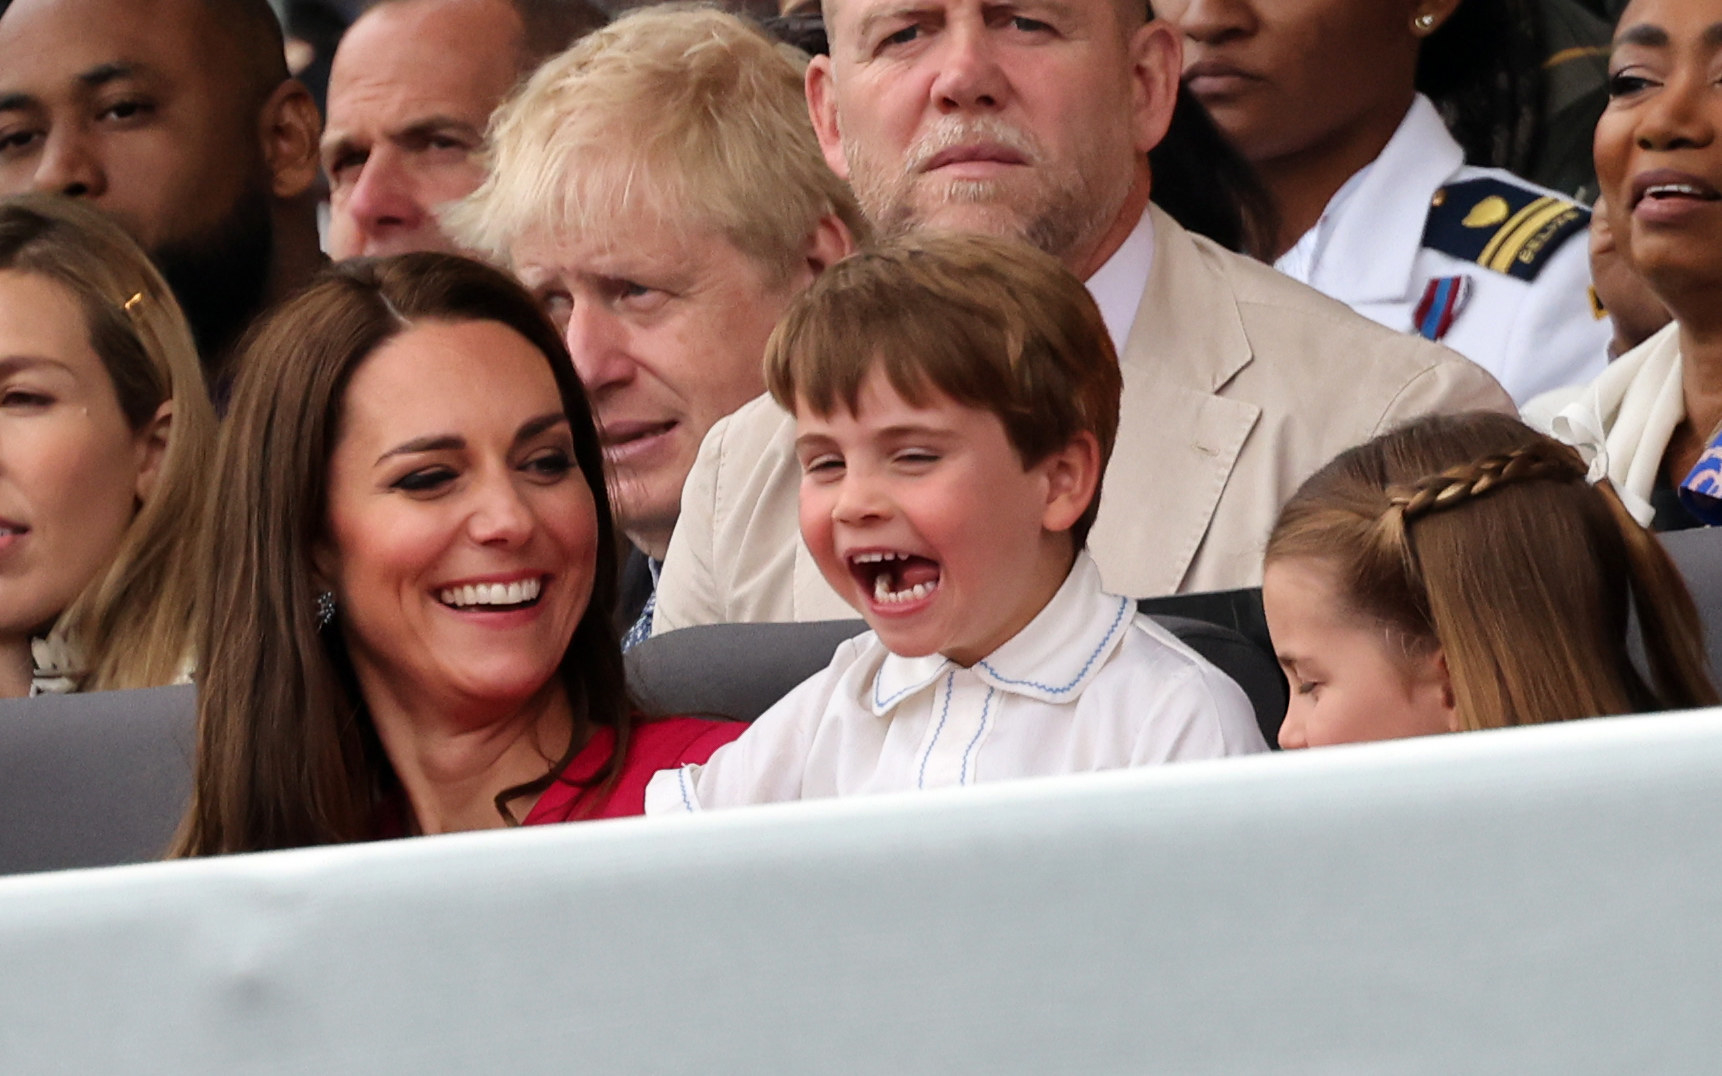 The duchess smiling at a smiling Prince Louis